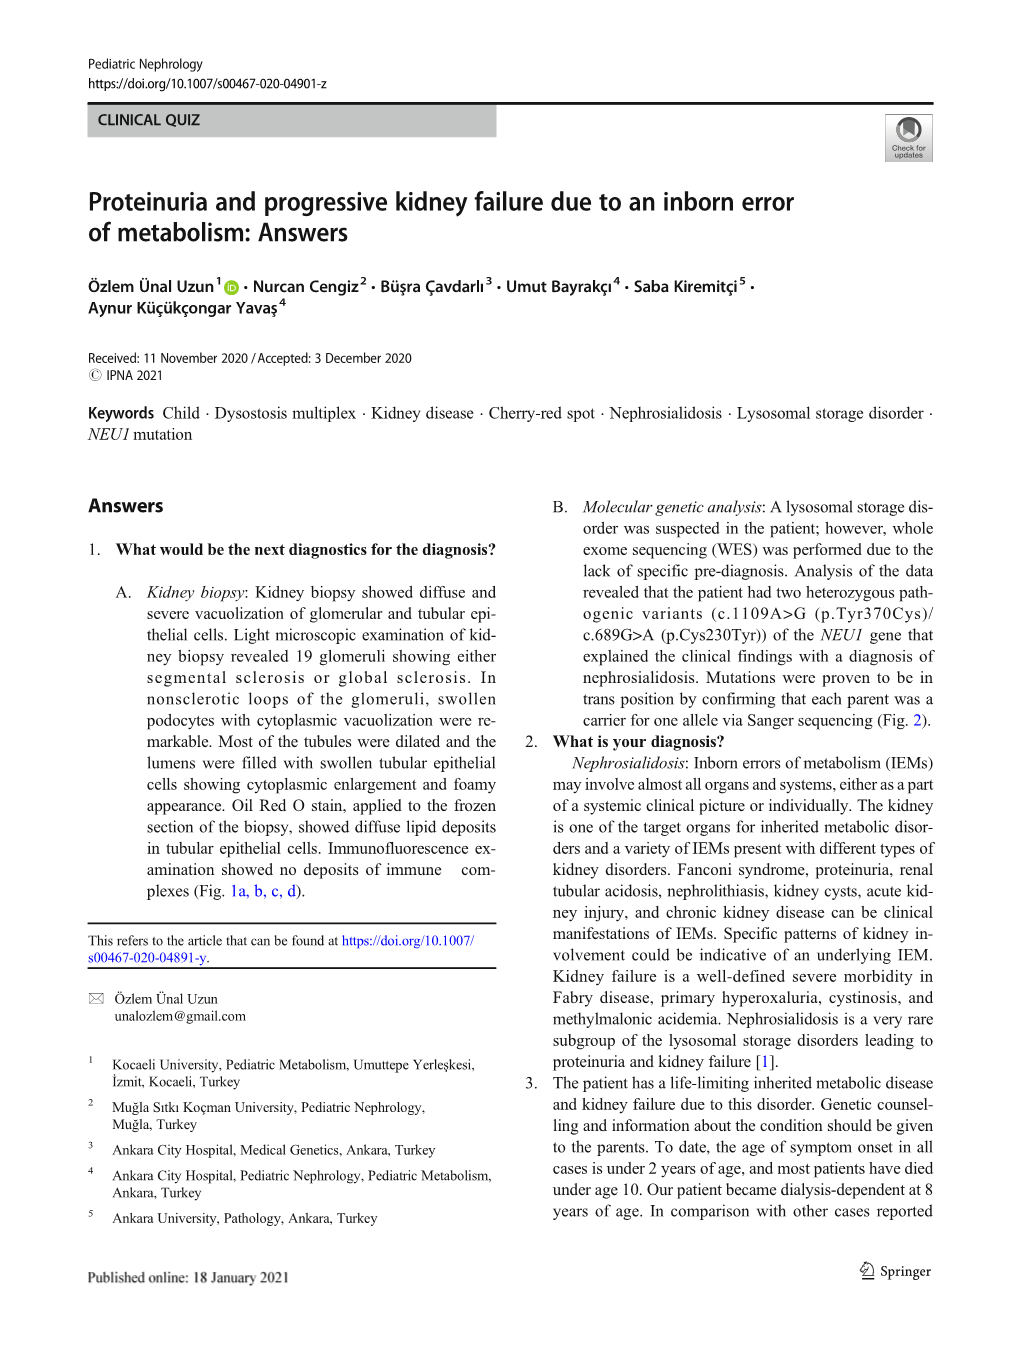 Proteinuria and Progressive Kidney Failure Due to an Inborn Error of Metabolism: Answers